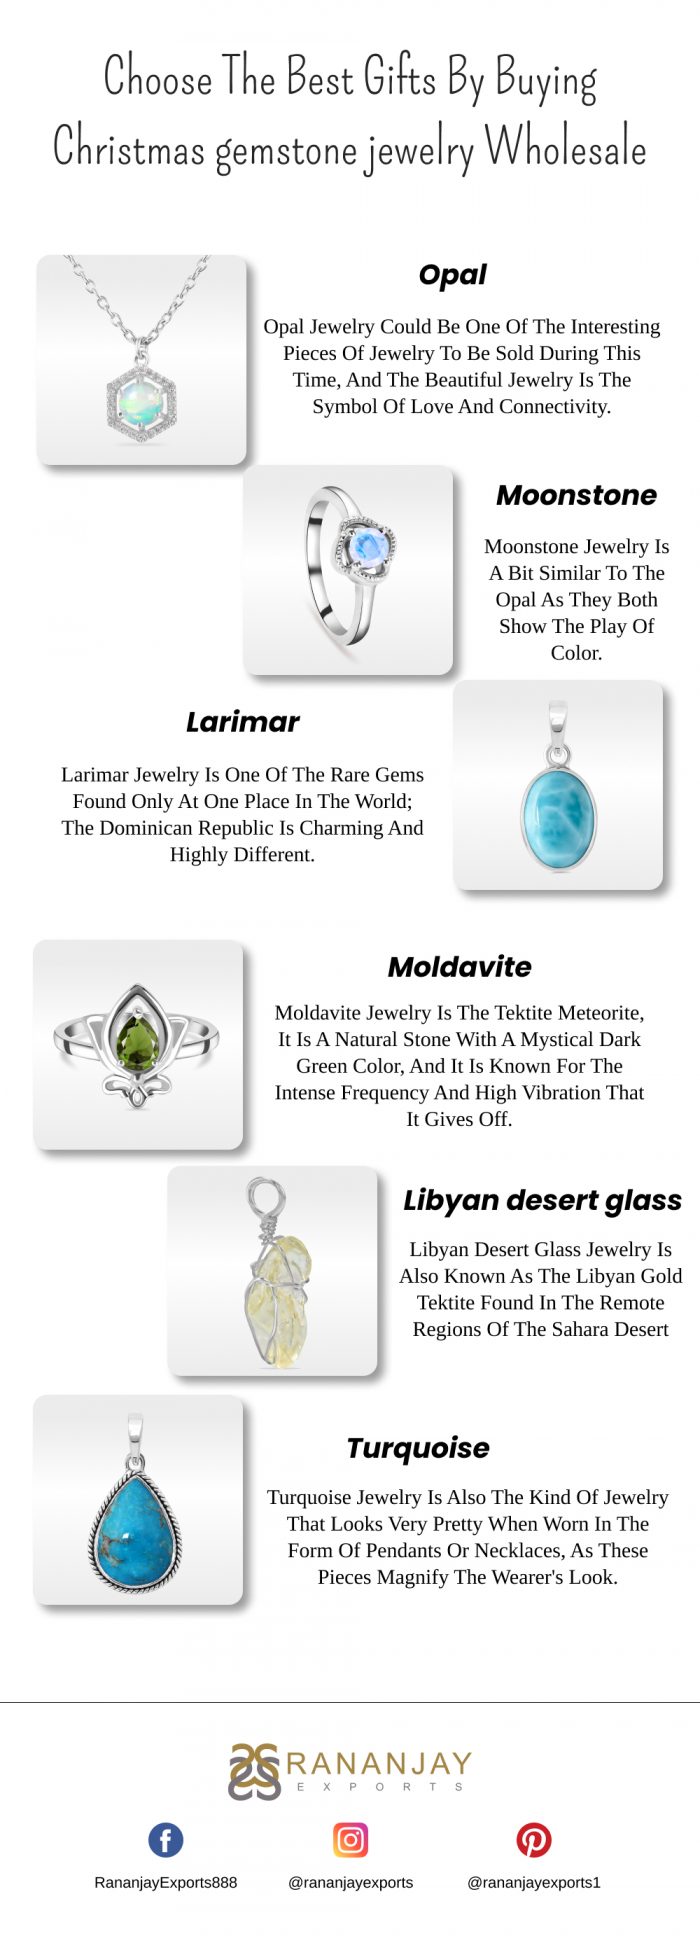 Choose The Best Gifts By Buying Christmas Gemstone Jewelry Wholesale